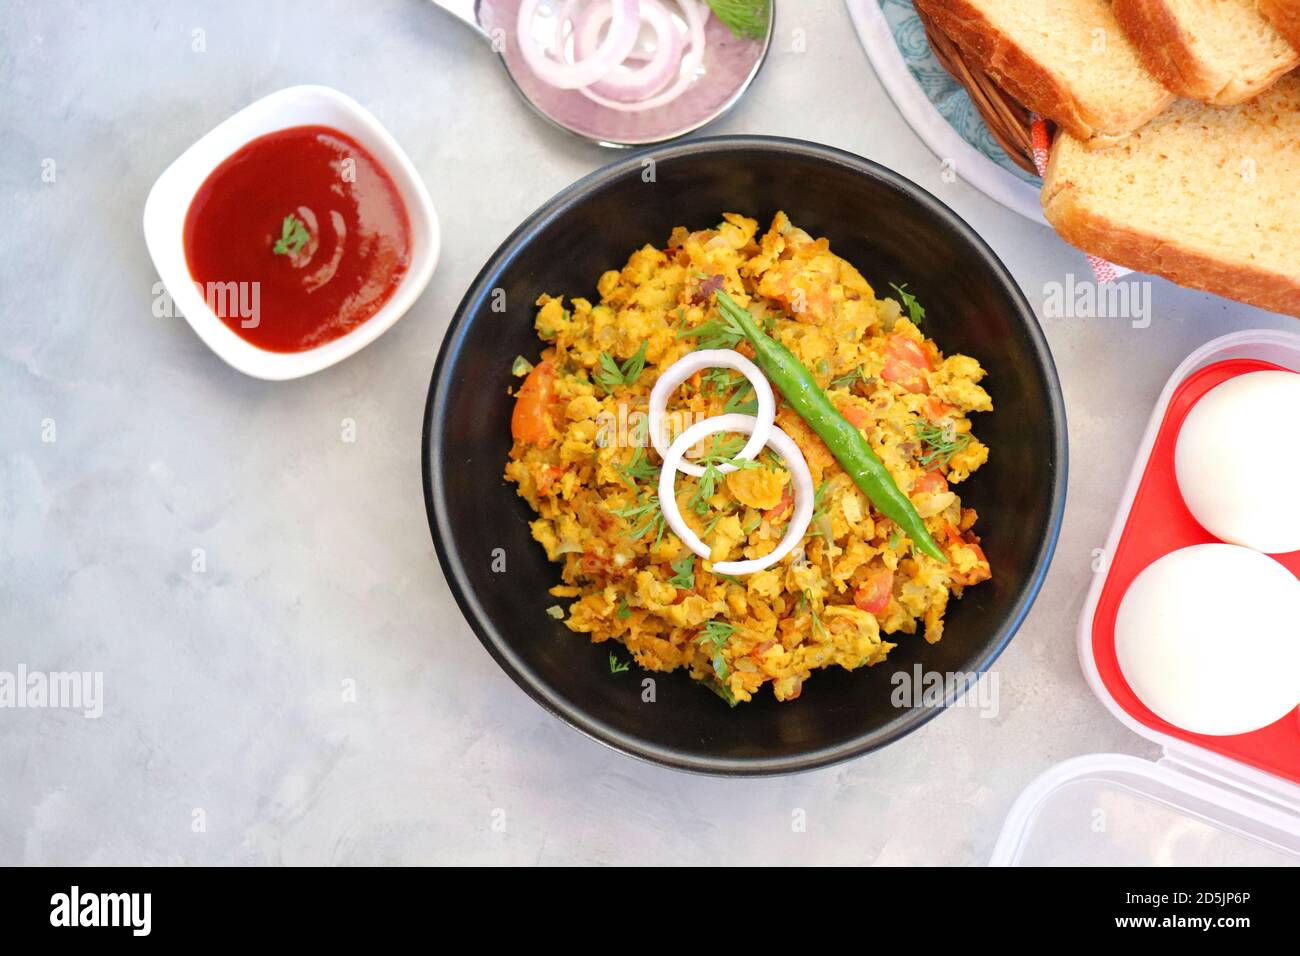 Indian Breakfast Dish - Parsi Akuri or Anda Bhurji or Indian spicy scrambled eggs served with toasted brown bread & ketchup. Famous Indian street food Stock Photo